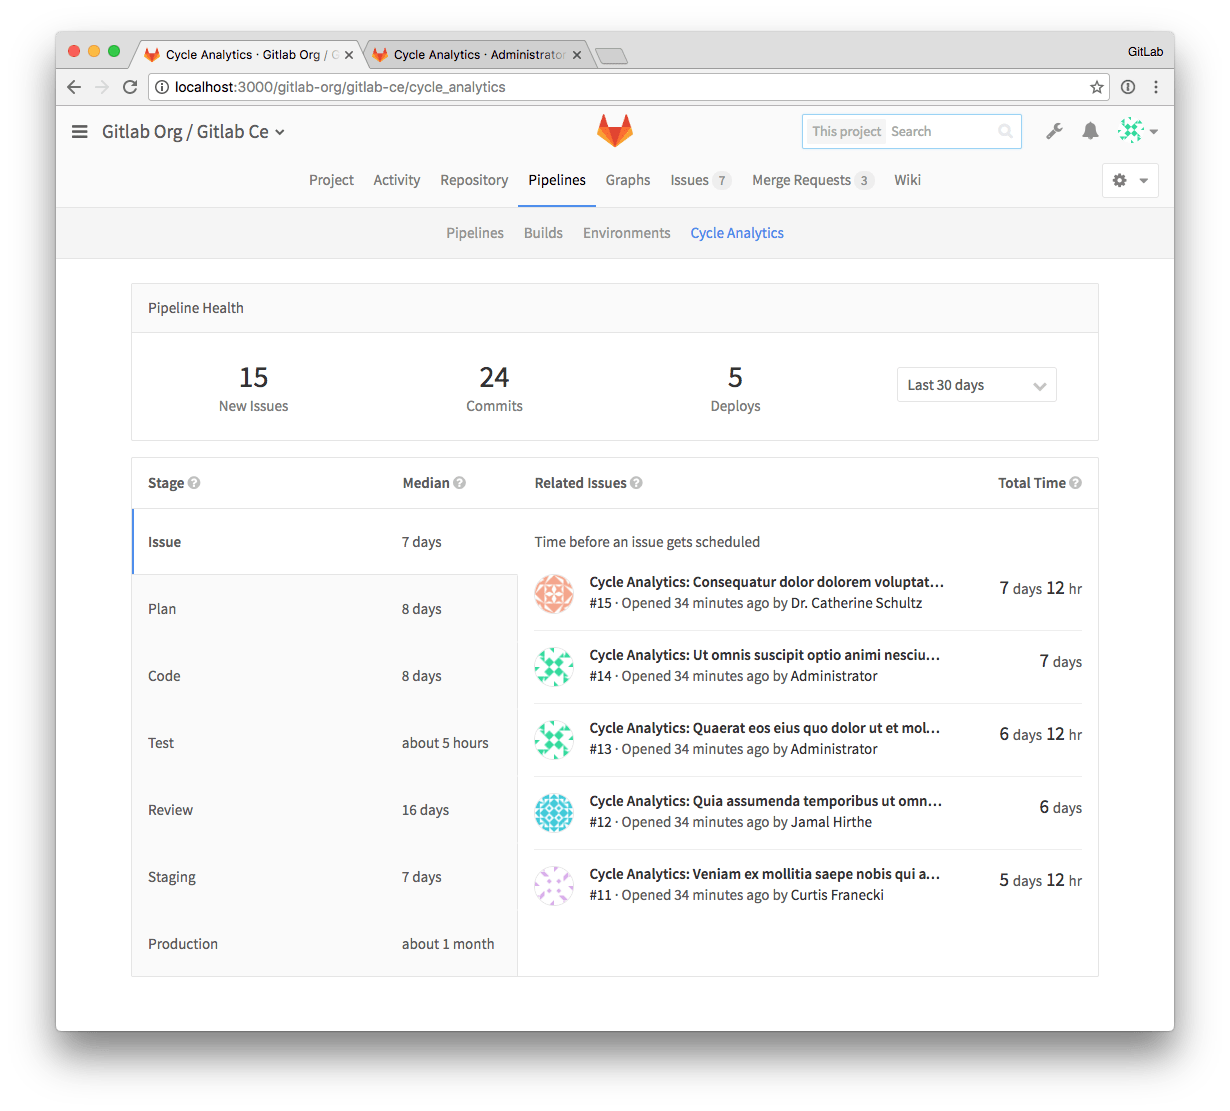 Improved Cycle Analytics in GitLab 8.14